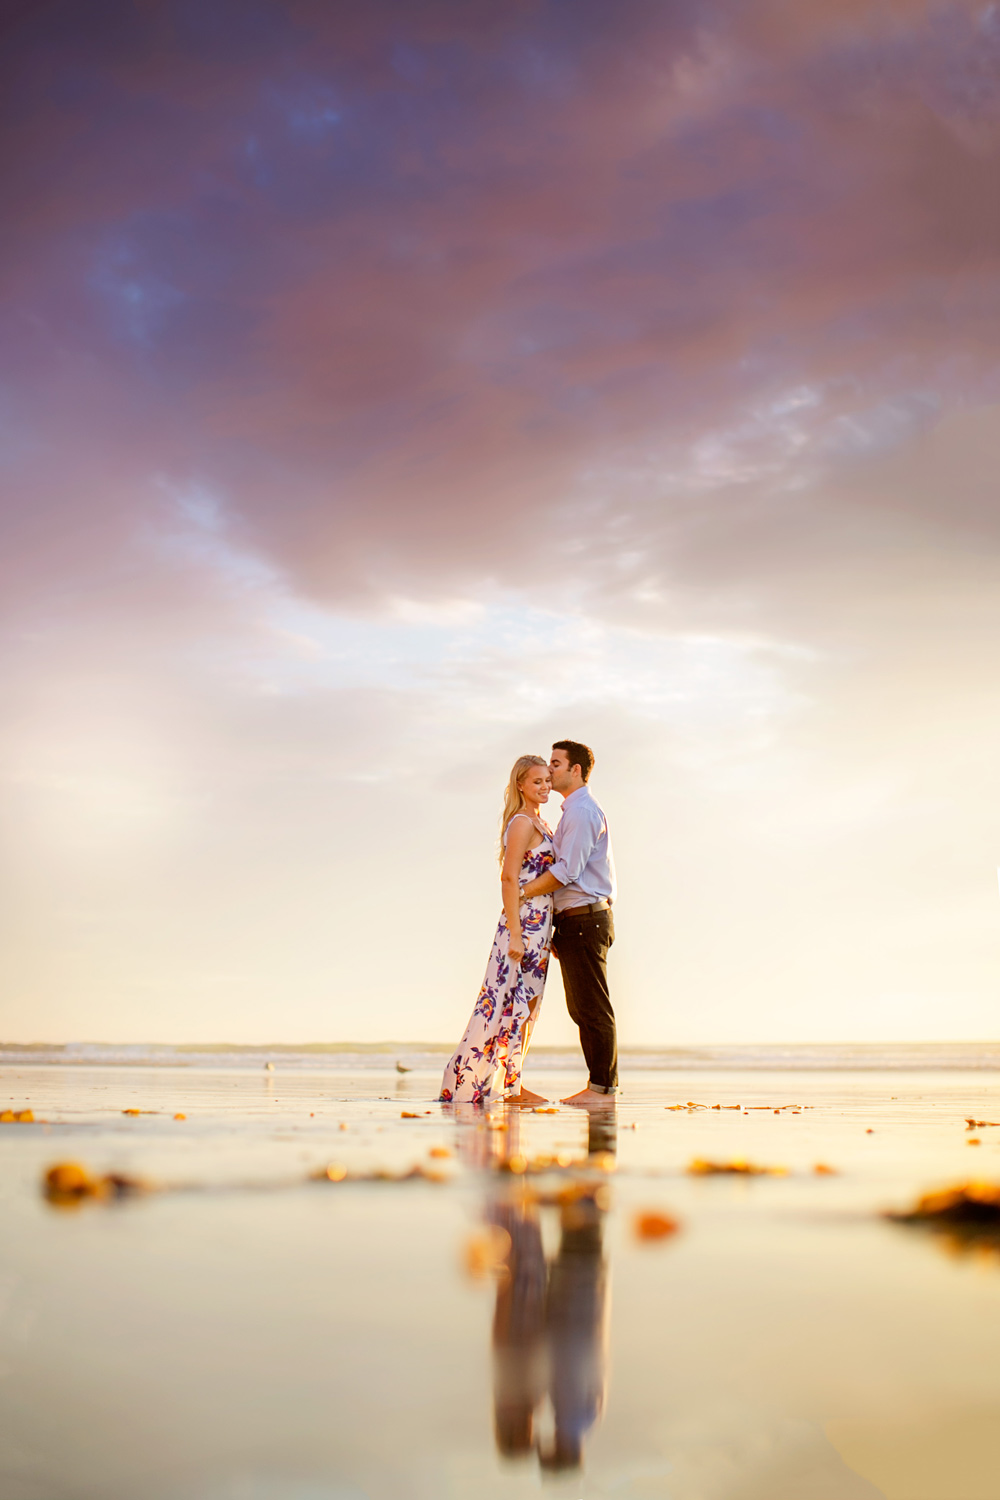 Cute-Beach-Engagement-Session-033